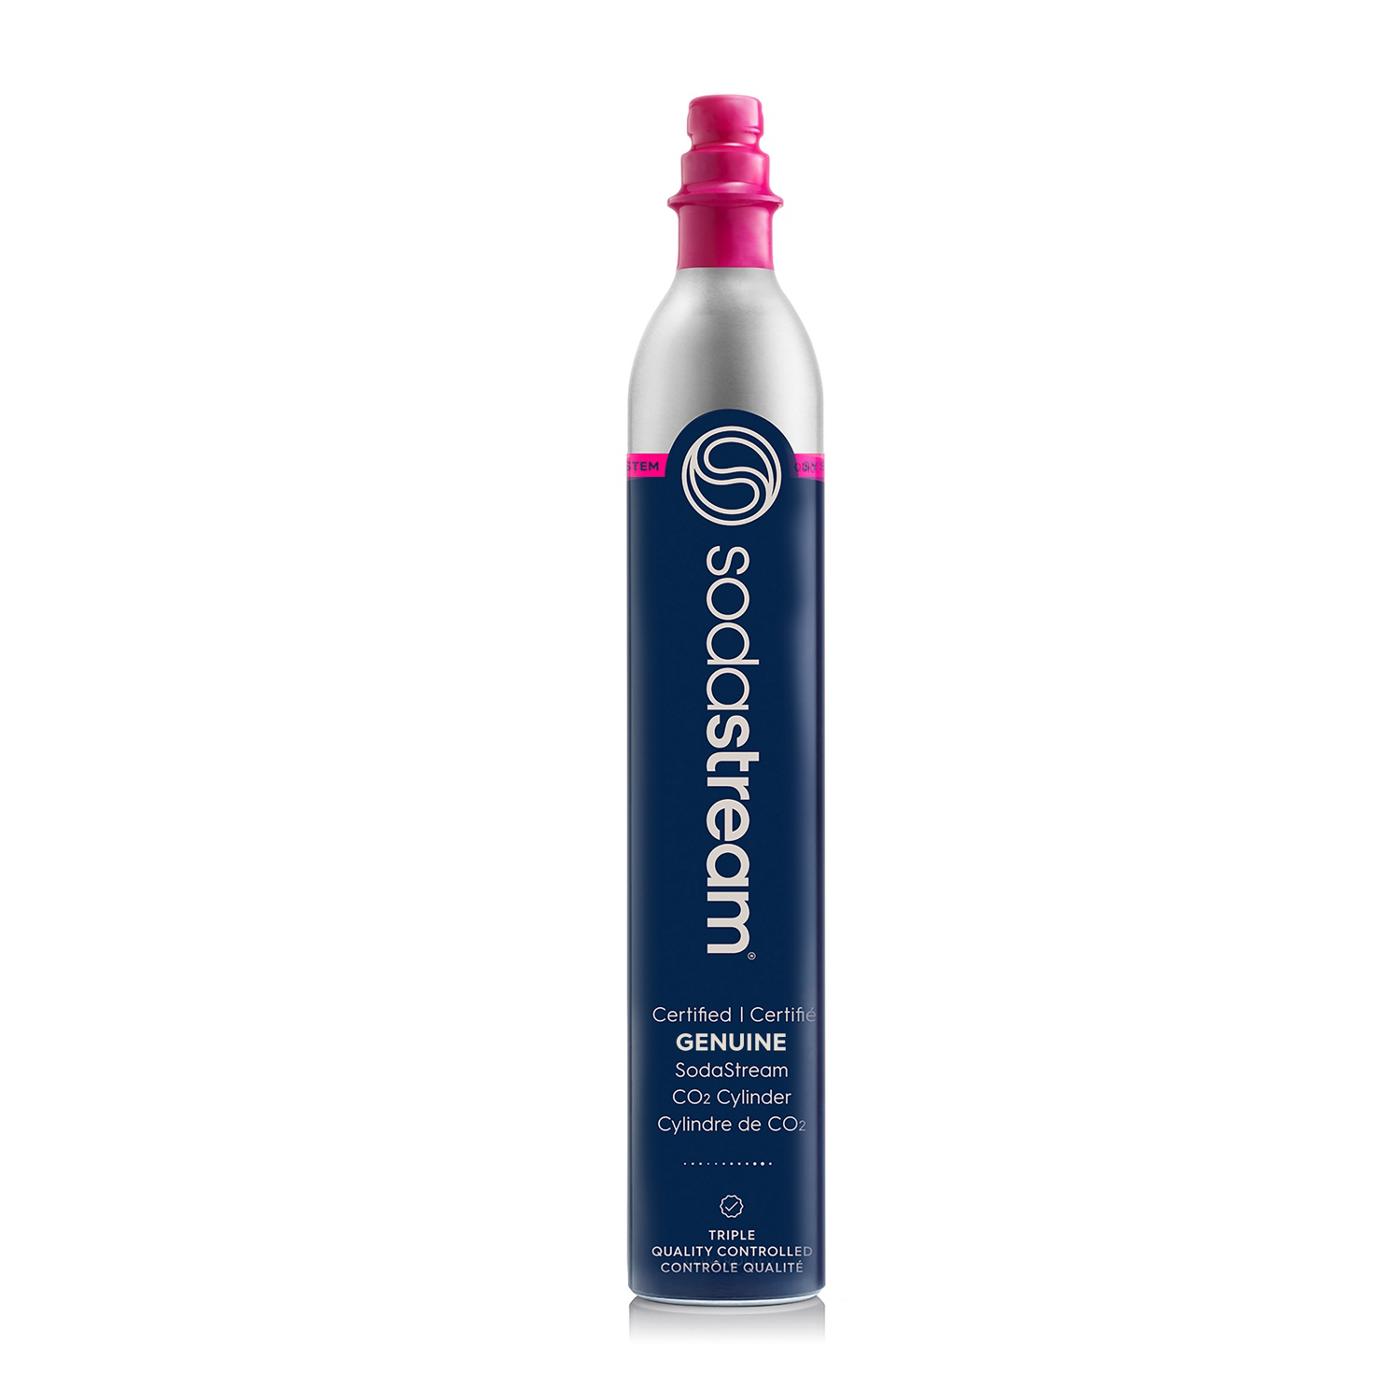 SodaStream Quick Connect CO2 Carbonator Cylinder; image 1 of 3